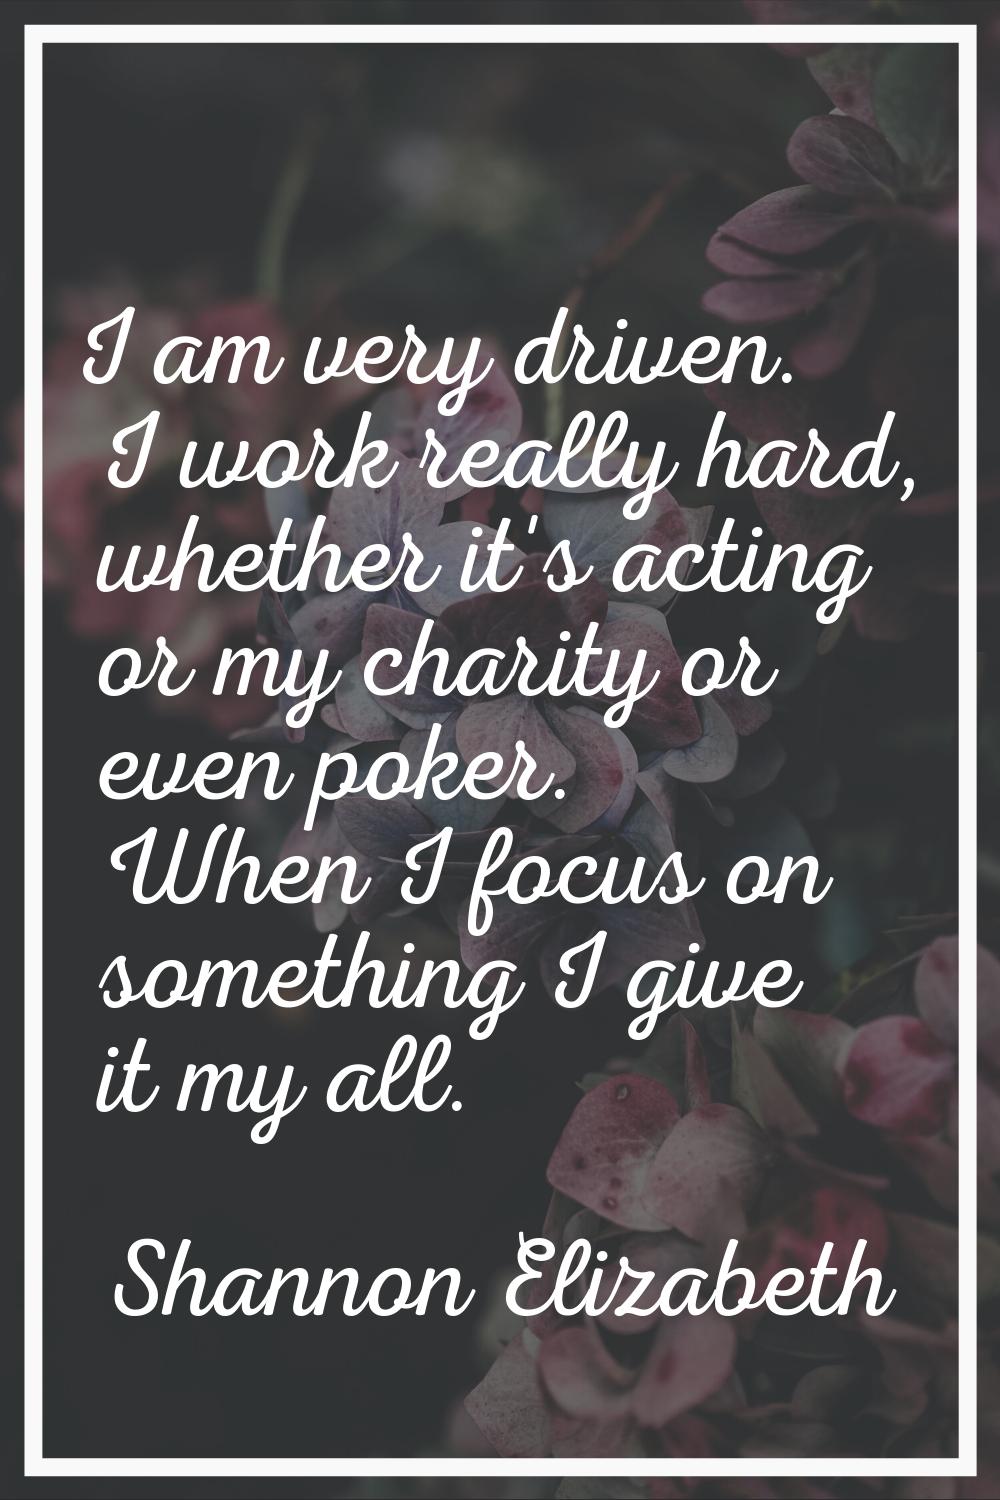 I am very driven. I work really hard, whether it's acting or my charity or even poker. When I focus